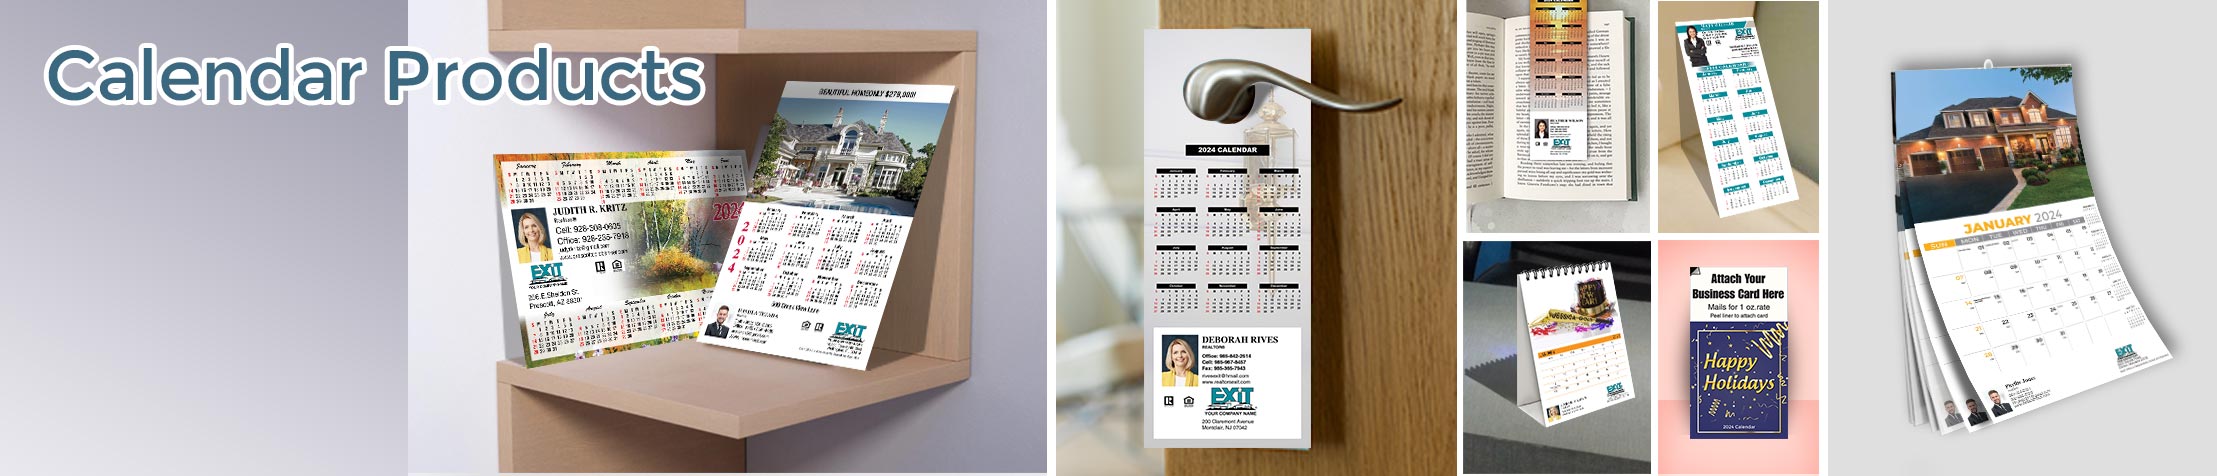 Exit Realty Calendar Products - Exit Realty approved vendor 2019 calendars, magnets, door hangers, bookmarks, tear away note pads | BestPrintBuy.com